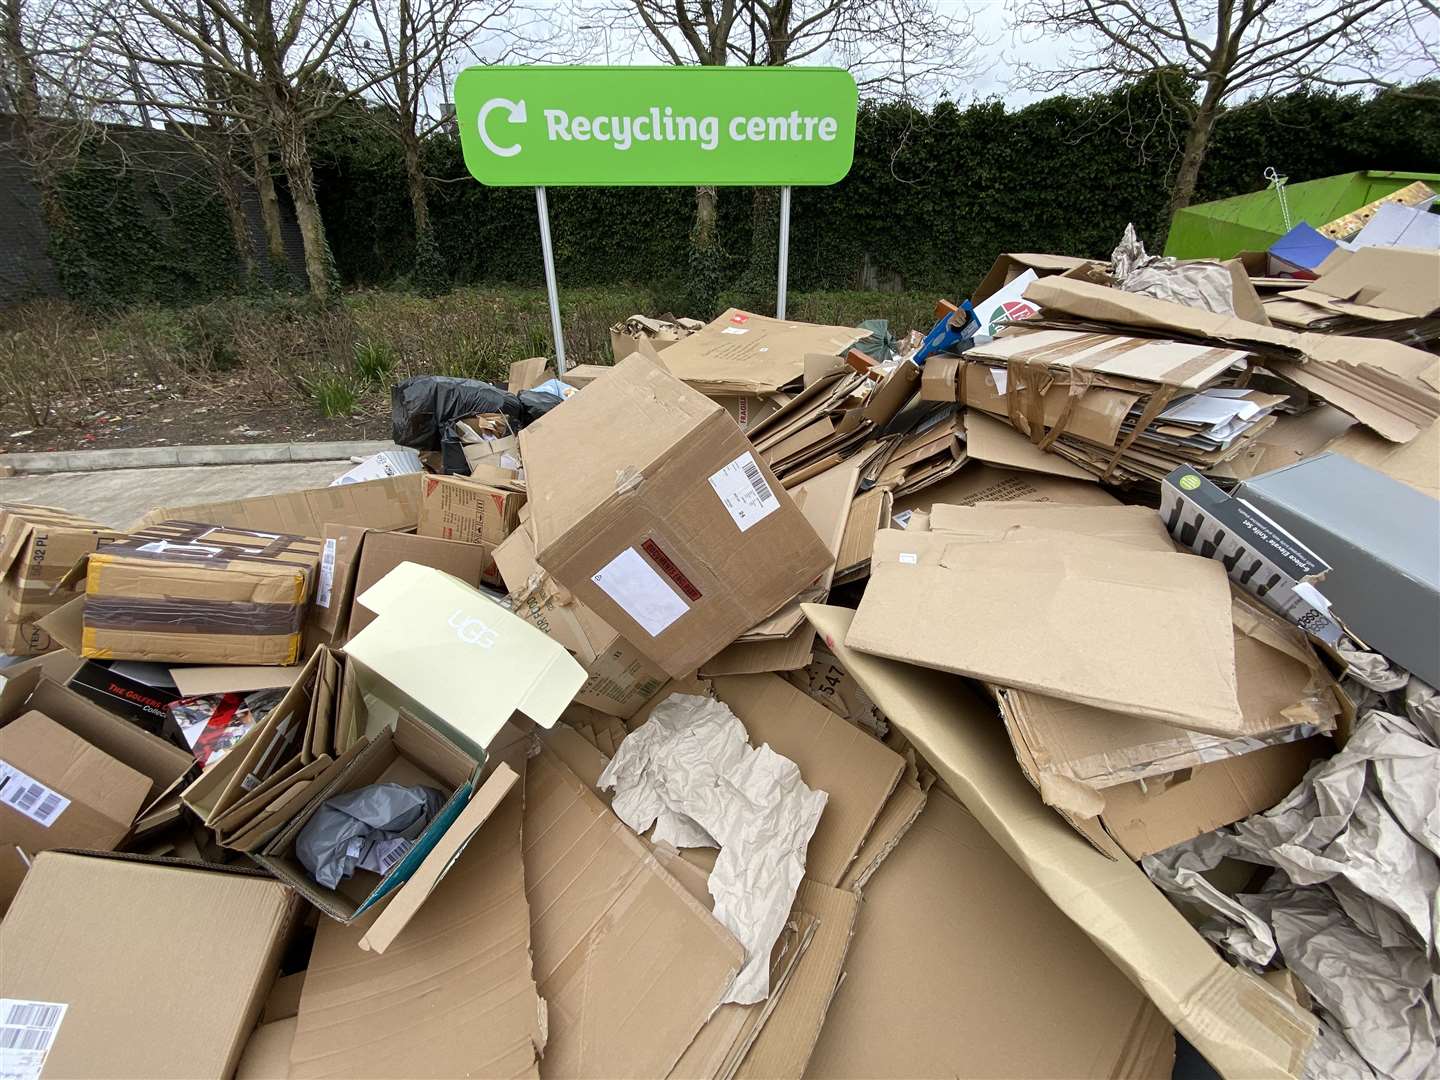 Cardboard boxes in front of a recycling centre sign in a supermarket car park (Martin Keene/PA)